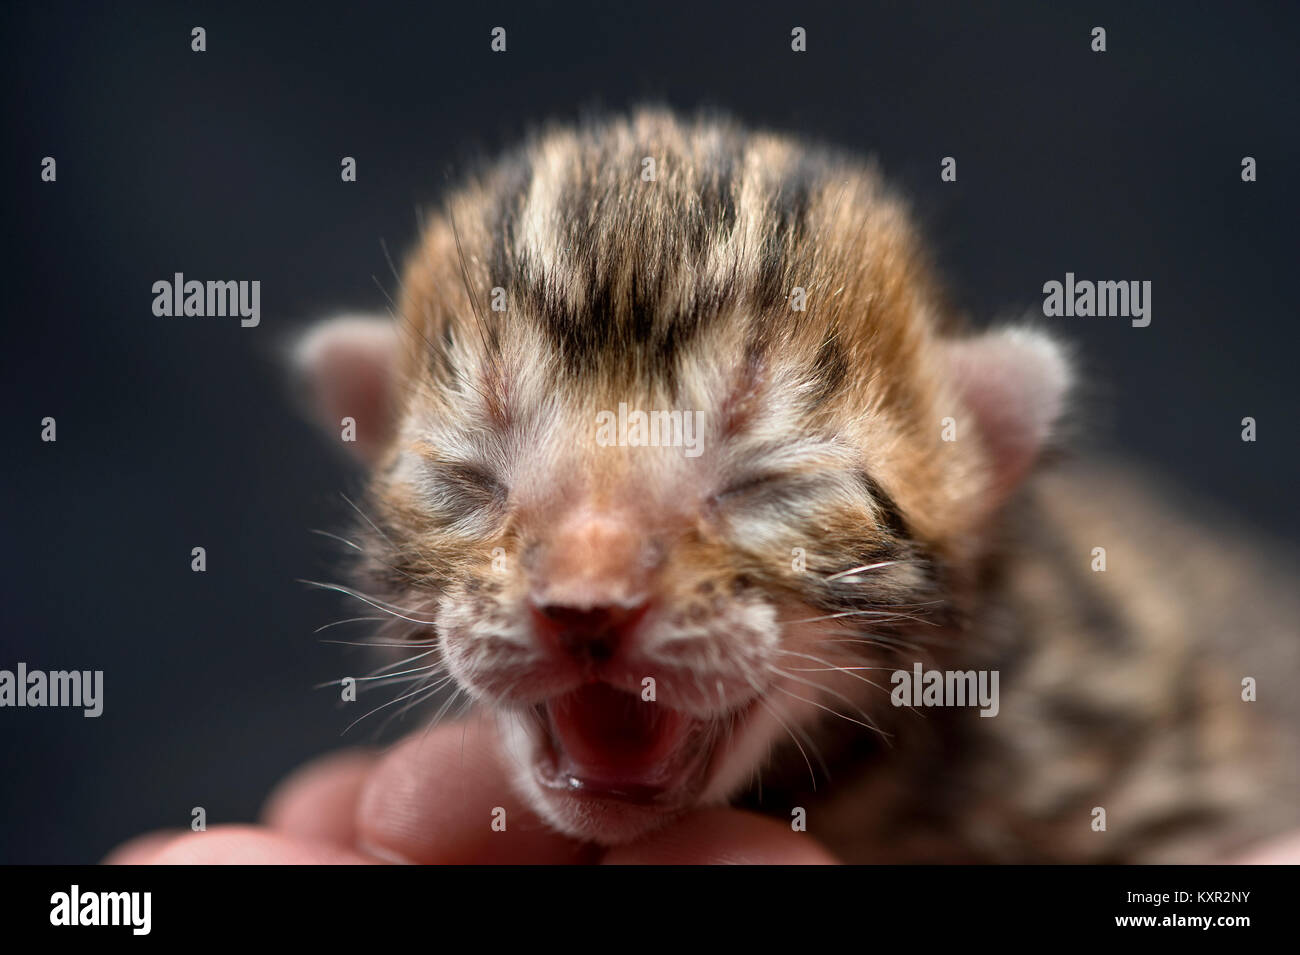 Two day old purebred bengal kitten from Pixel Perfect Cats cattery Stock Photo